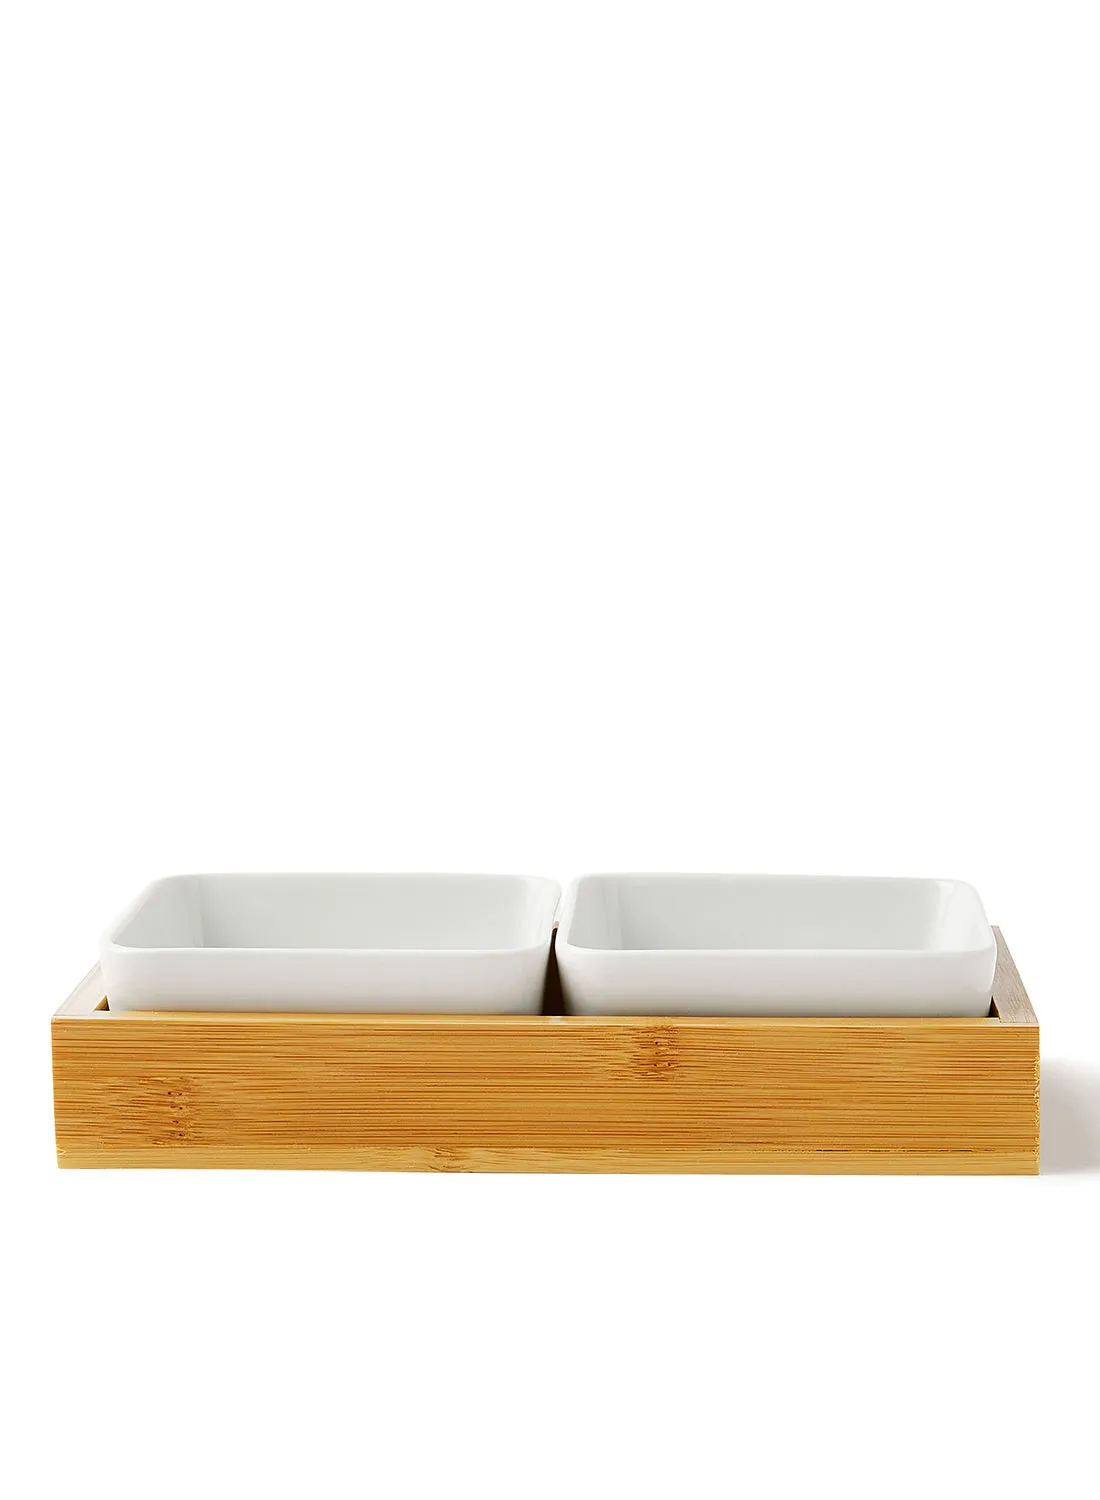 noon east Serving Set - Made Of Bamboo & Ceramic - Serving Plate - Serving Dishes - Tray - Bowls, Tray Brown/White